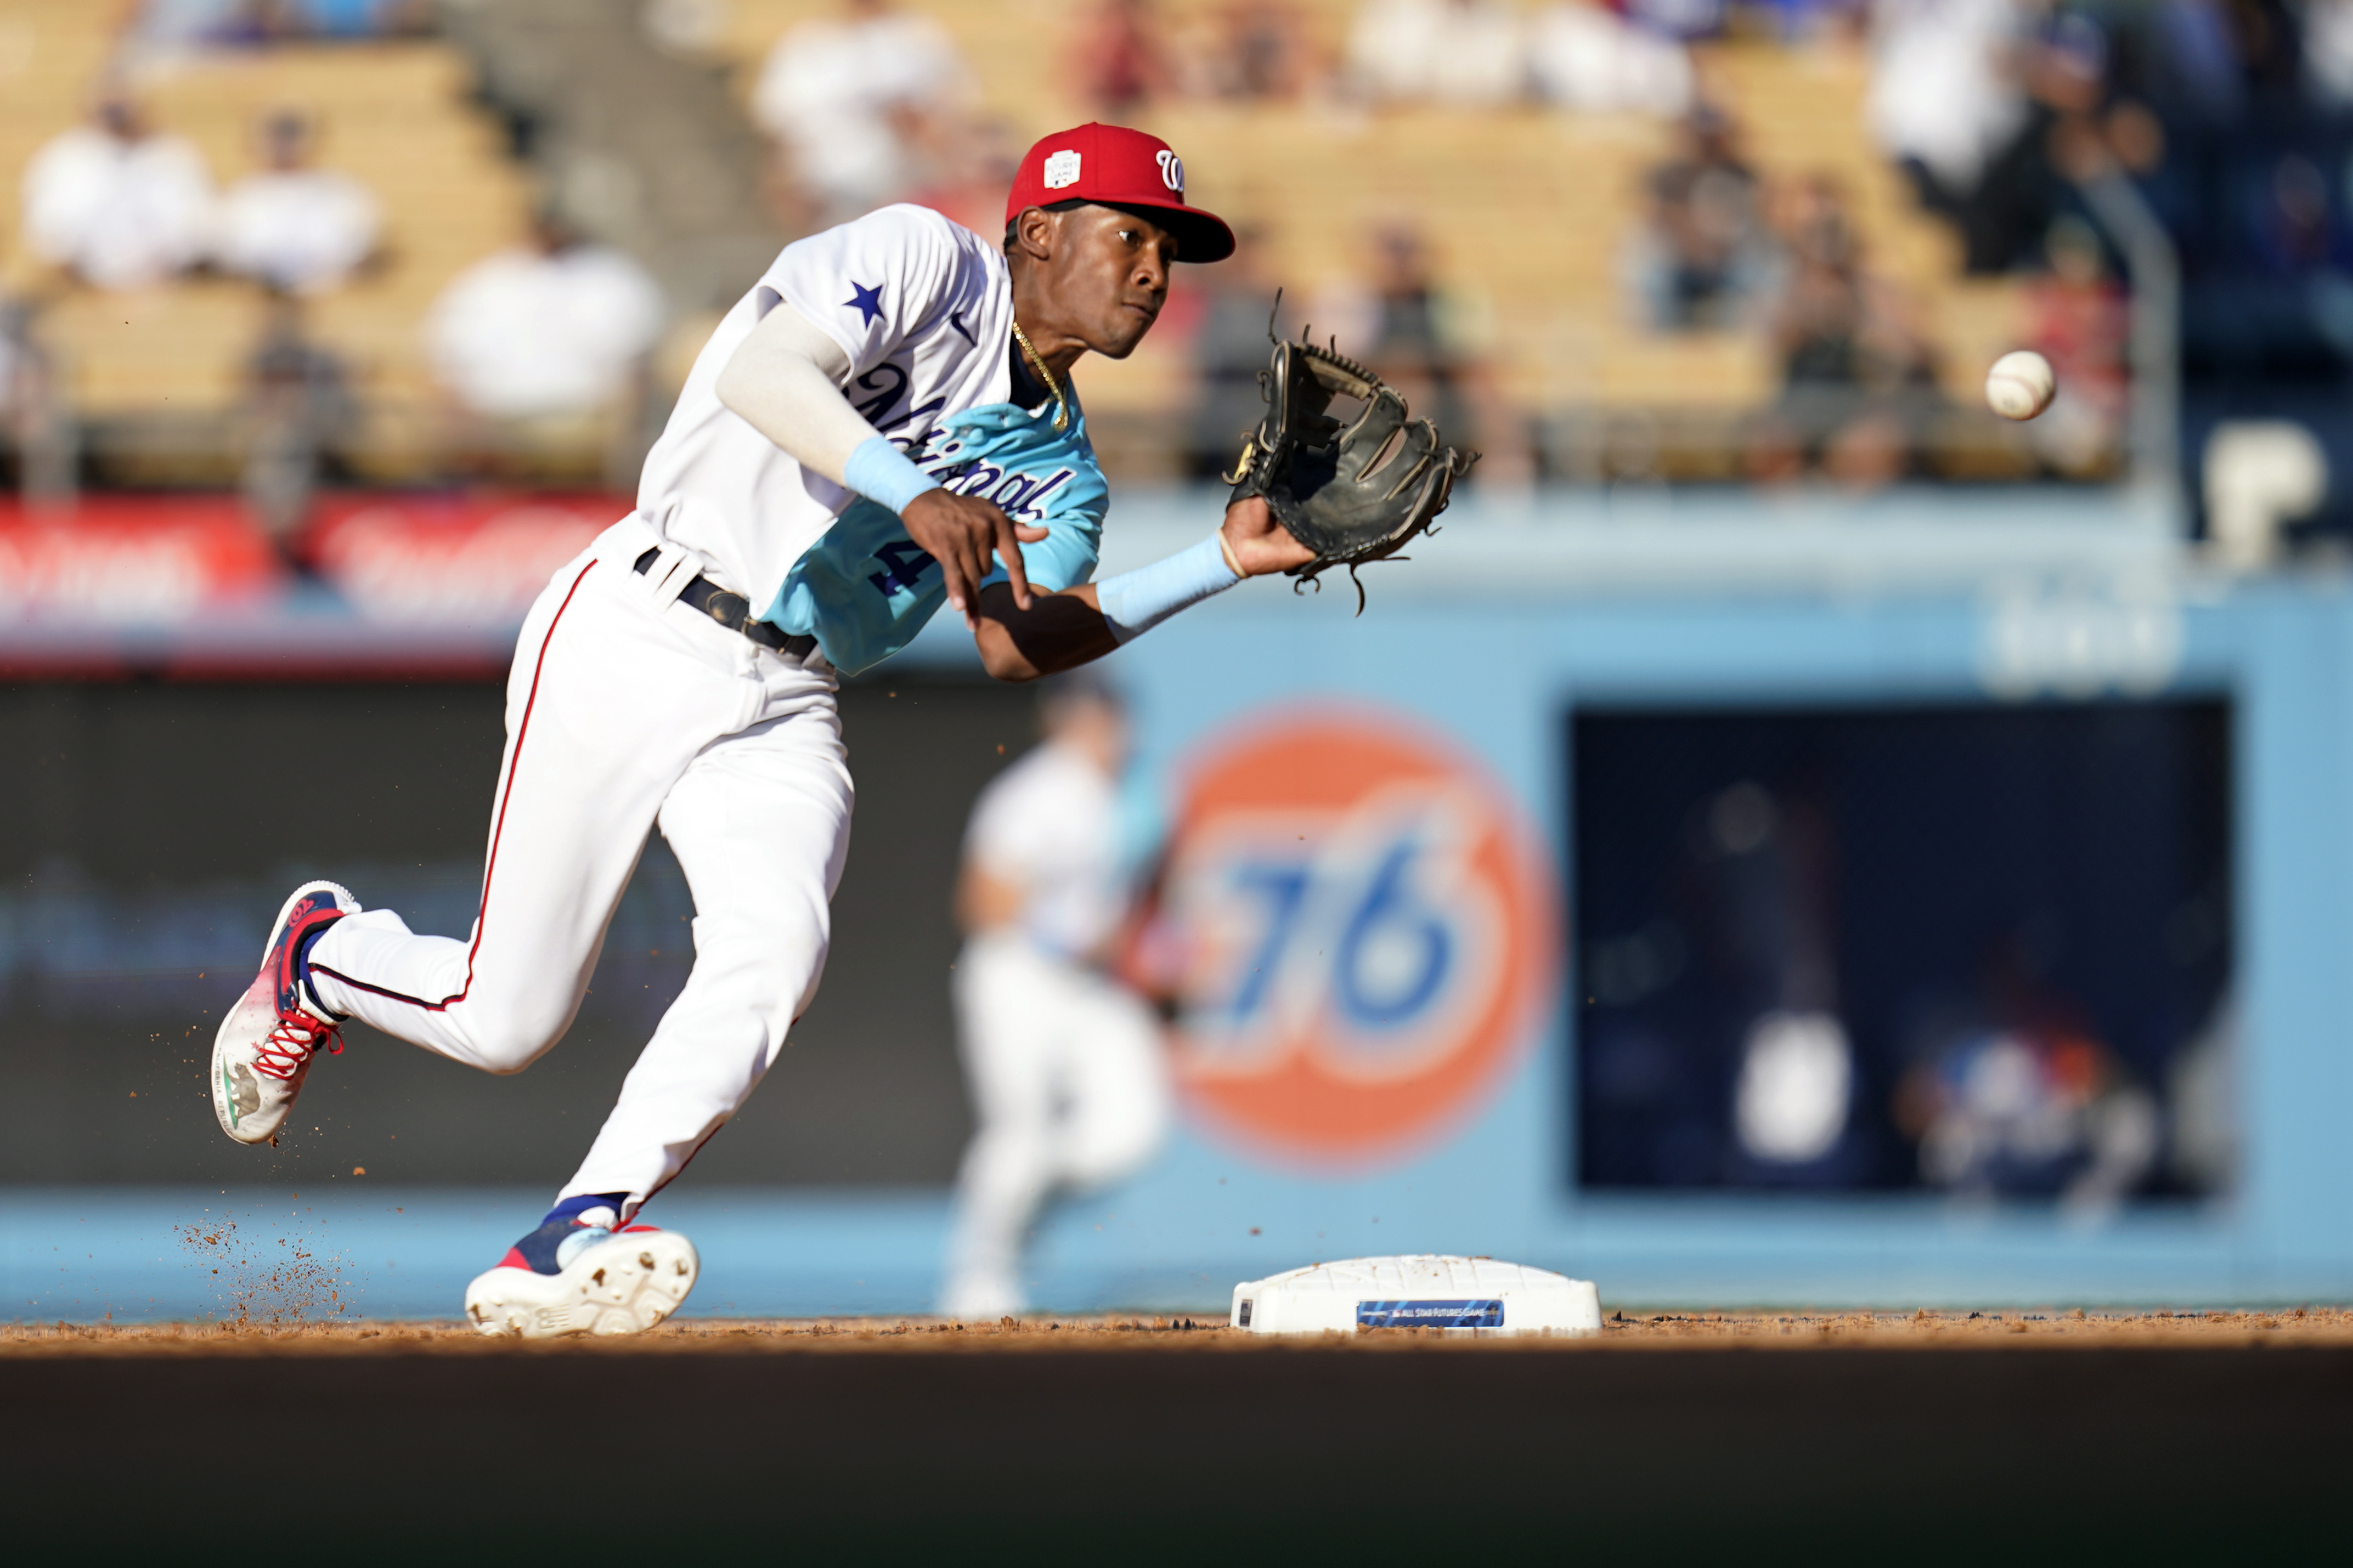 Dusty Baker 'proud' of son Darren for All-Star Futures Game